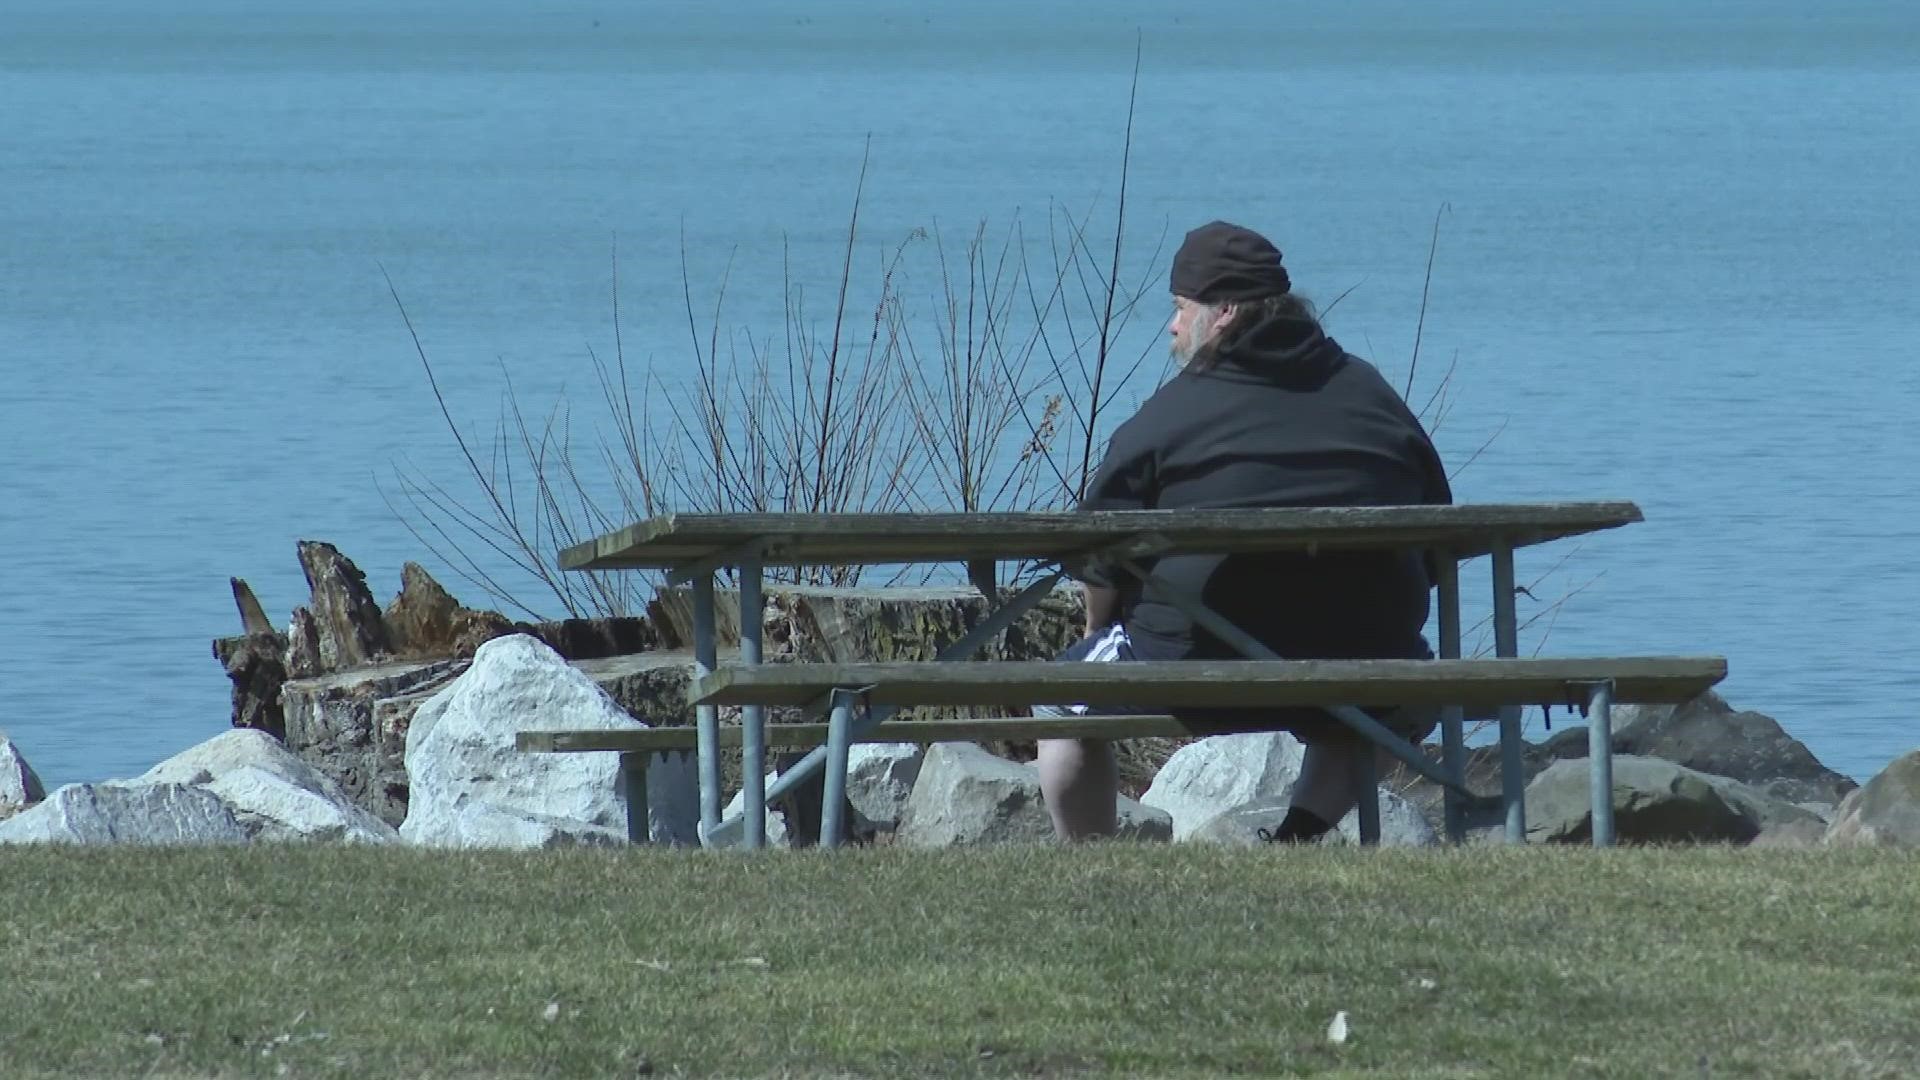 It finally feels like spring in Northeast Ohio! Check out some of the action from Cleveland's Edgewater Park.